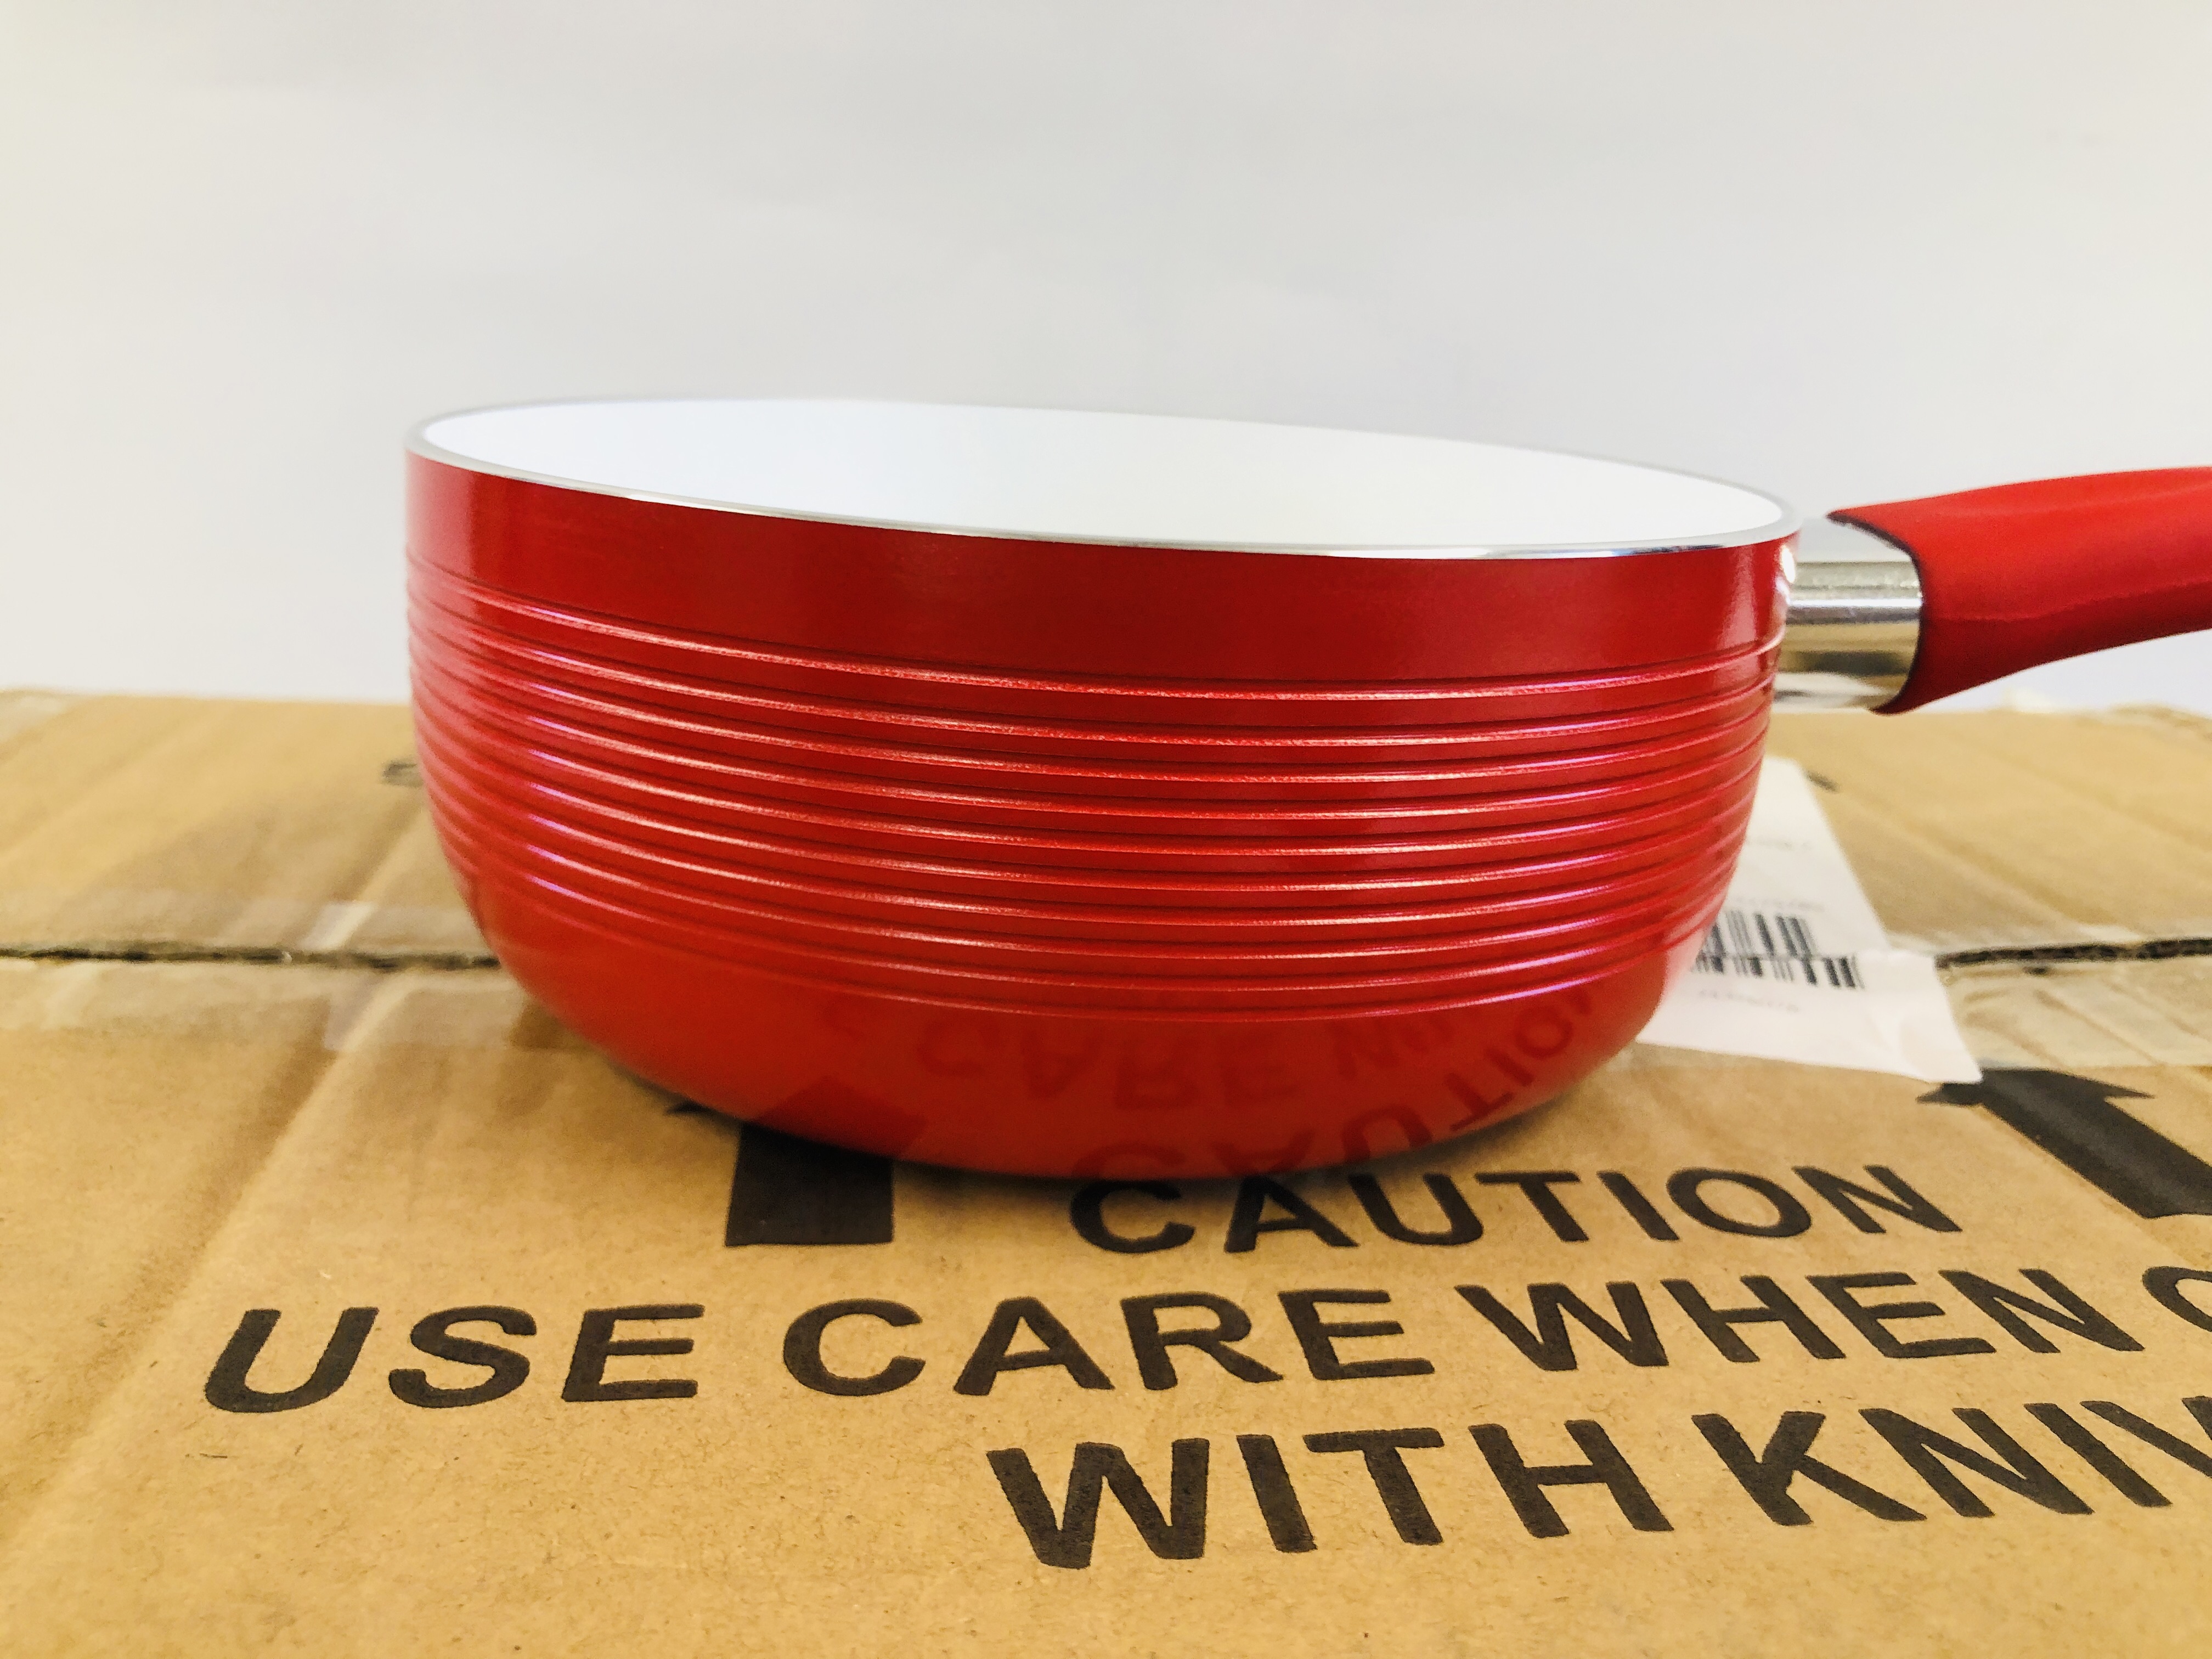 A BOXED AS NEW "STUDIO" 5 PIECE RIBBED CERAMIC NON STICK PAN SET, IN A RED FINISH. - Image 2 of 4